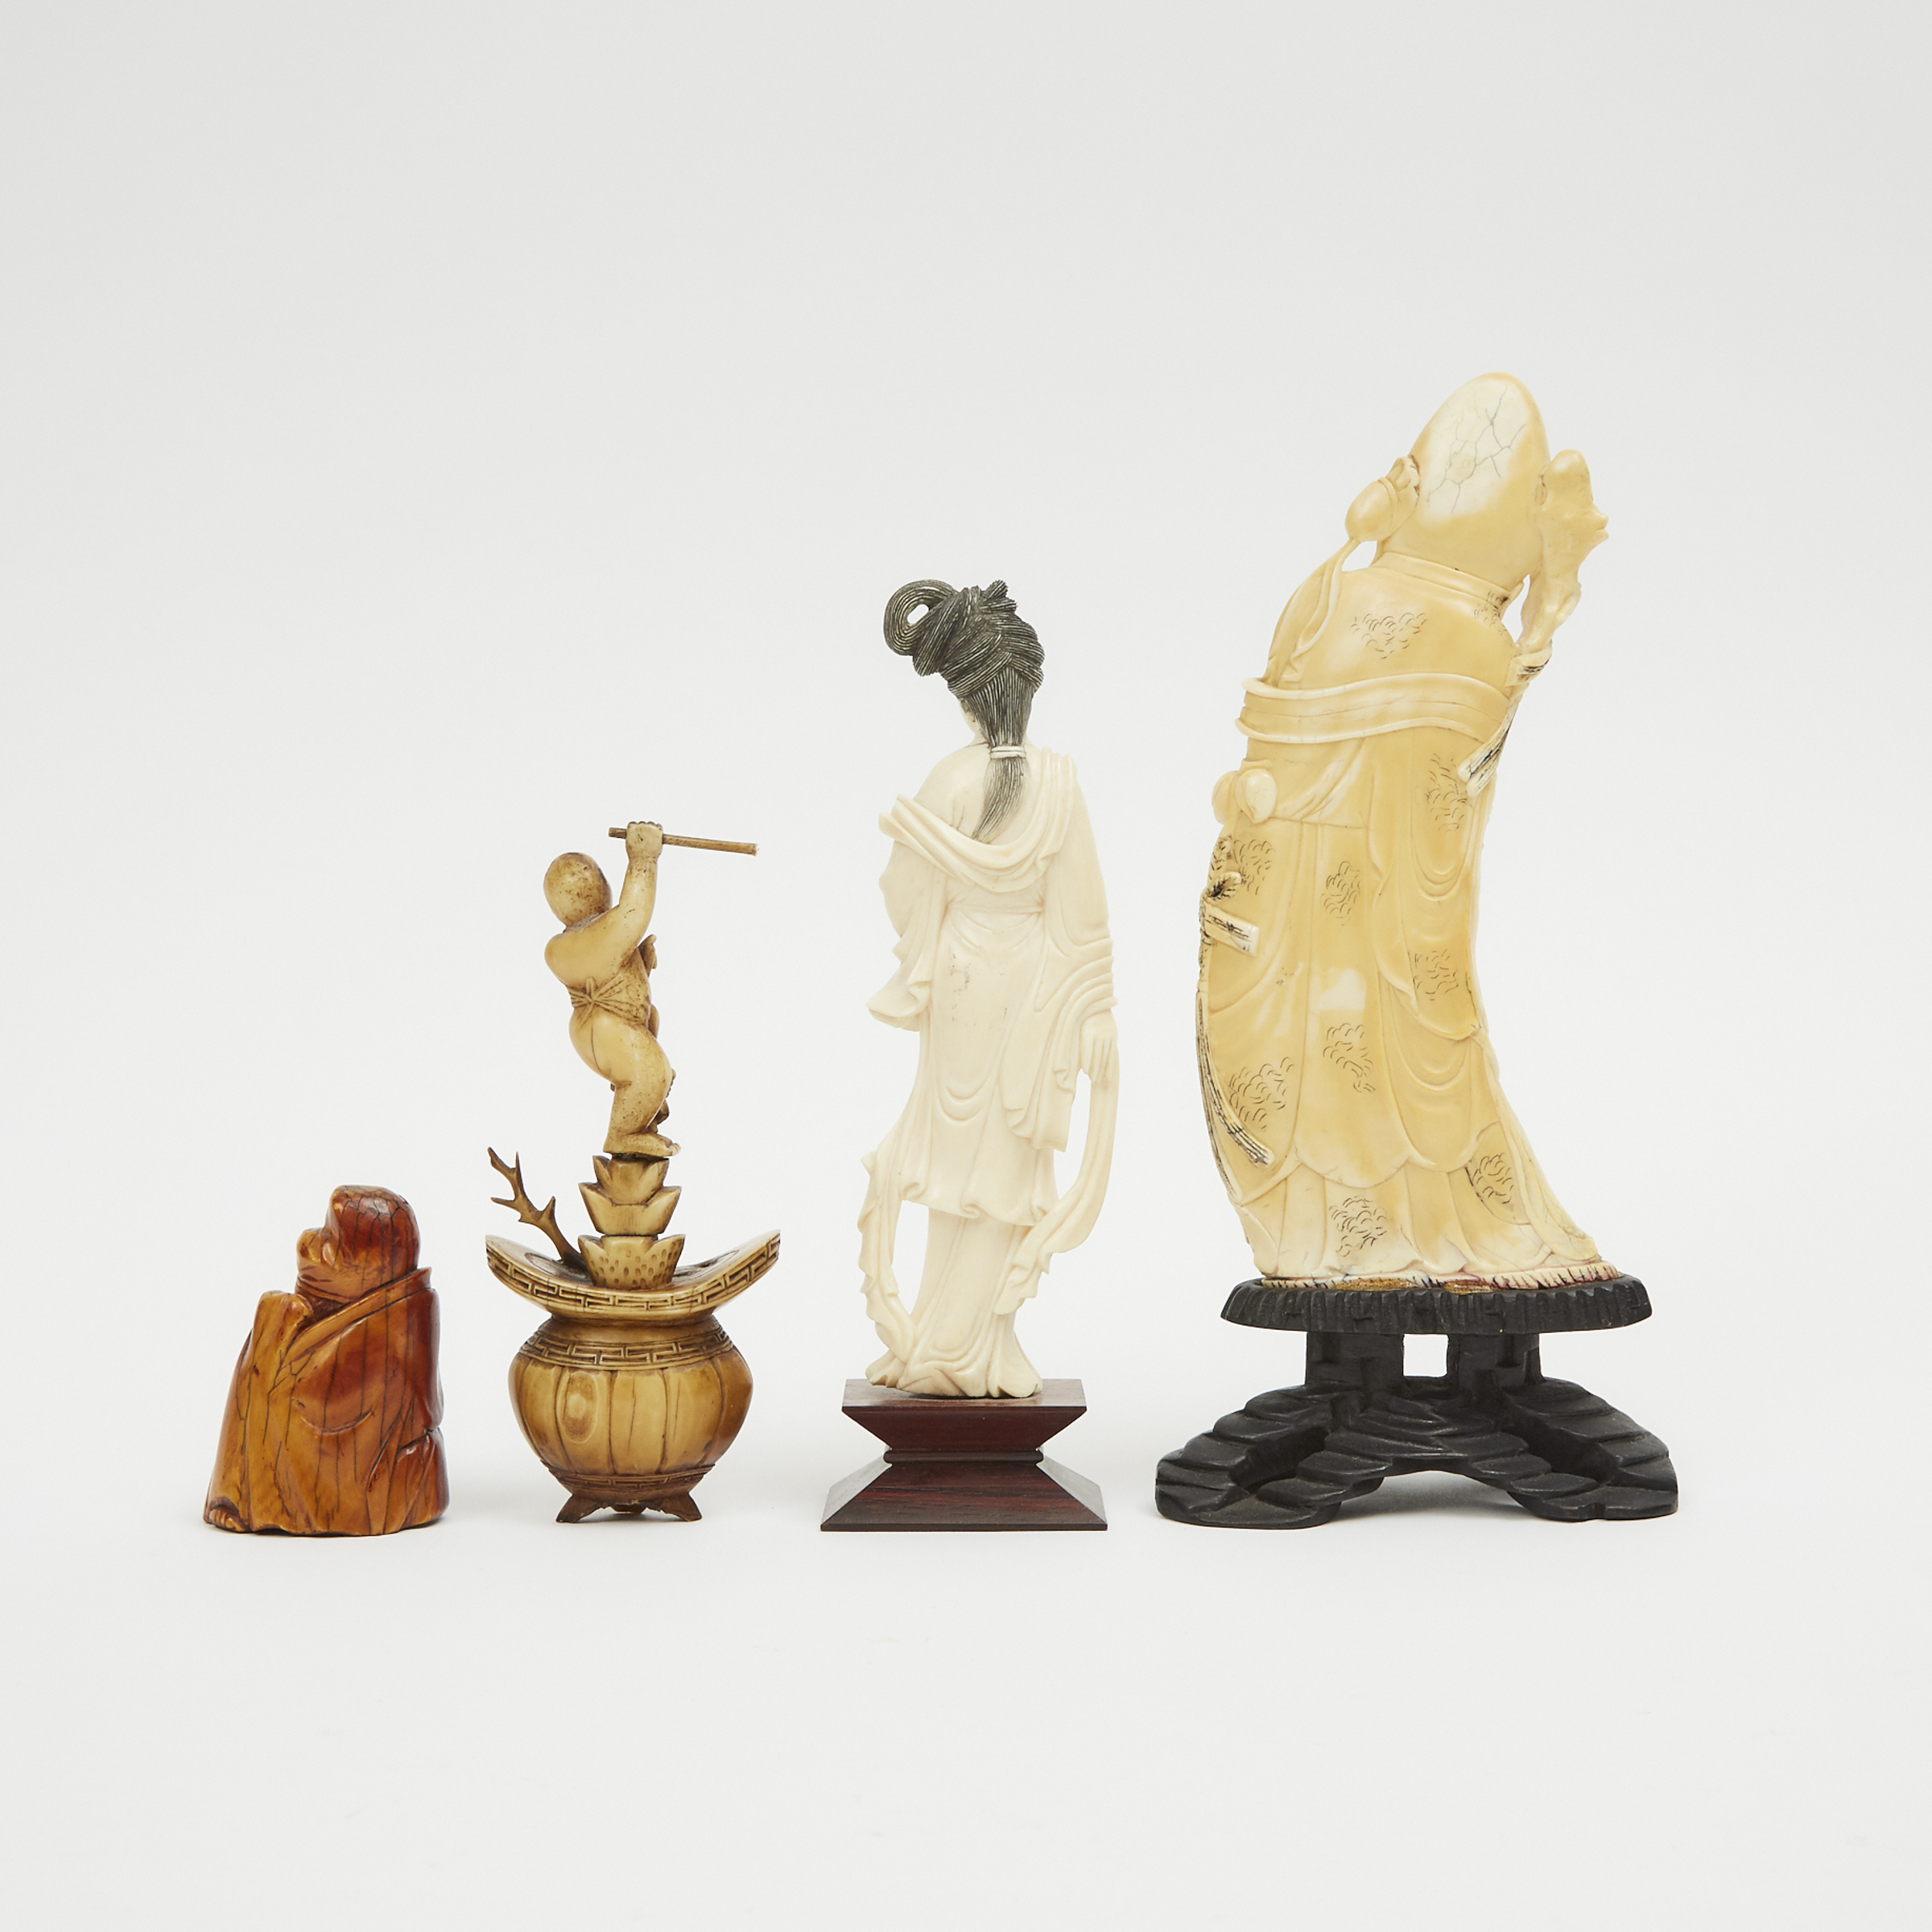 A Group of Four Chinese Ivory Carved Figures, 19th/Early 20th Century